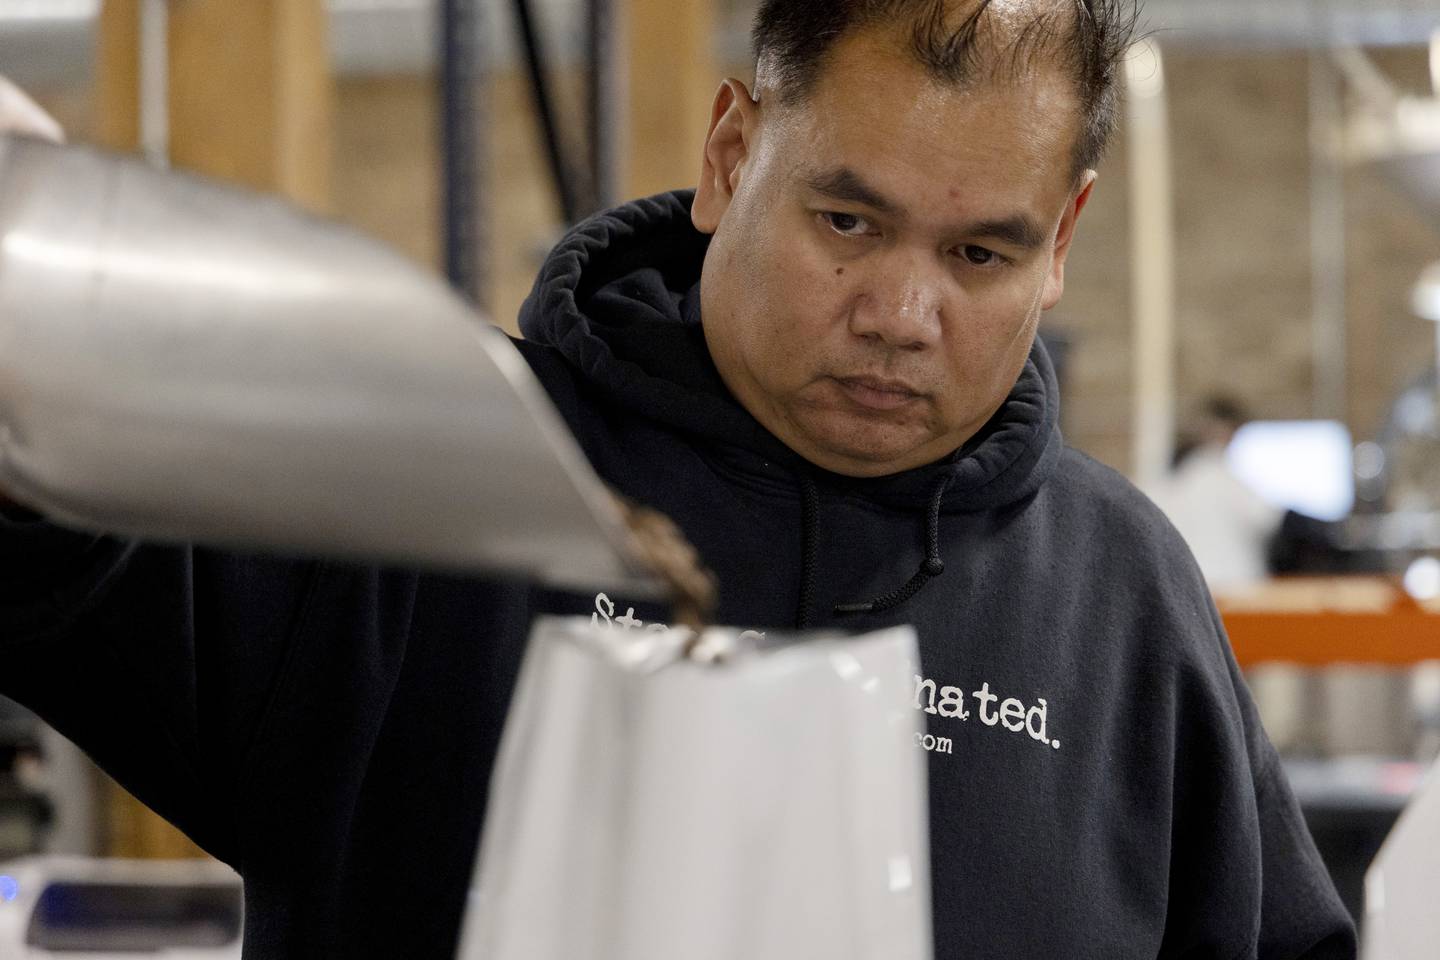 Veteran Roasters employee Jessie Avecilla (cq), who is a Navy veteran, fills a bag with coffee beans on Oct. 3, 2022.